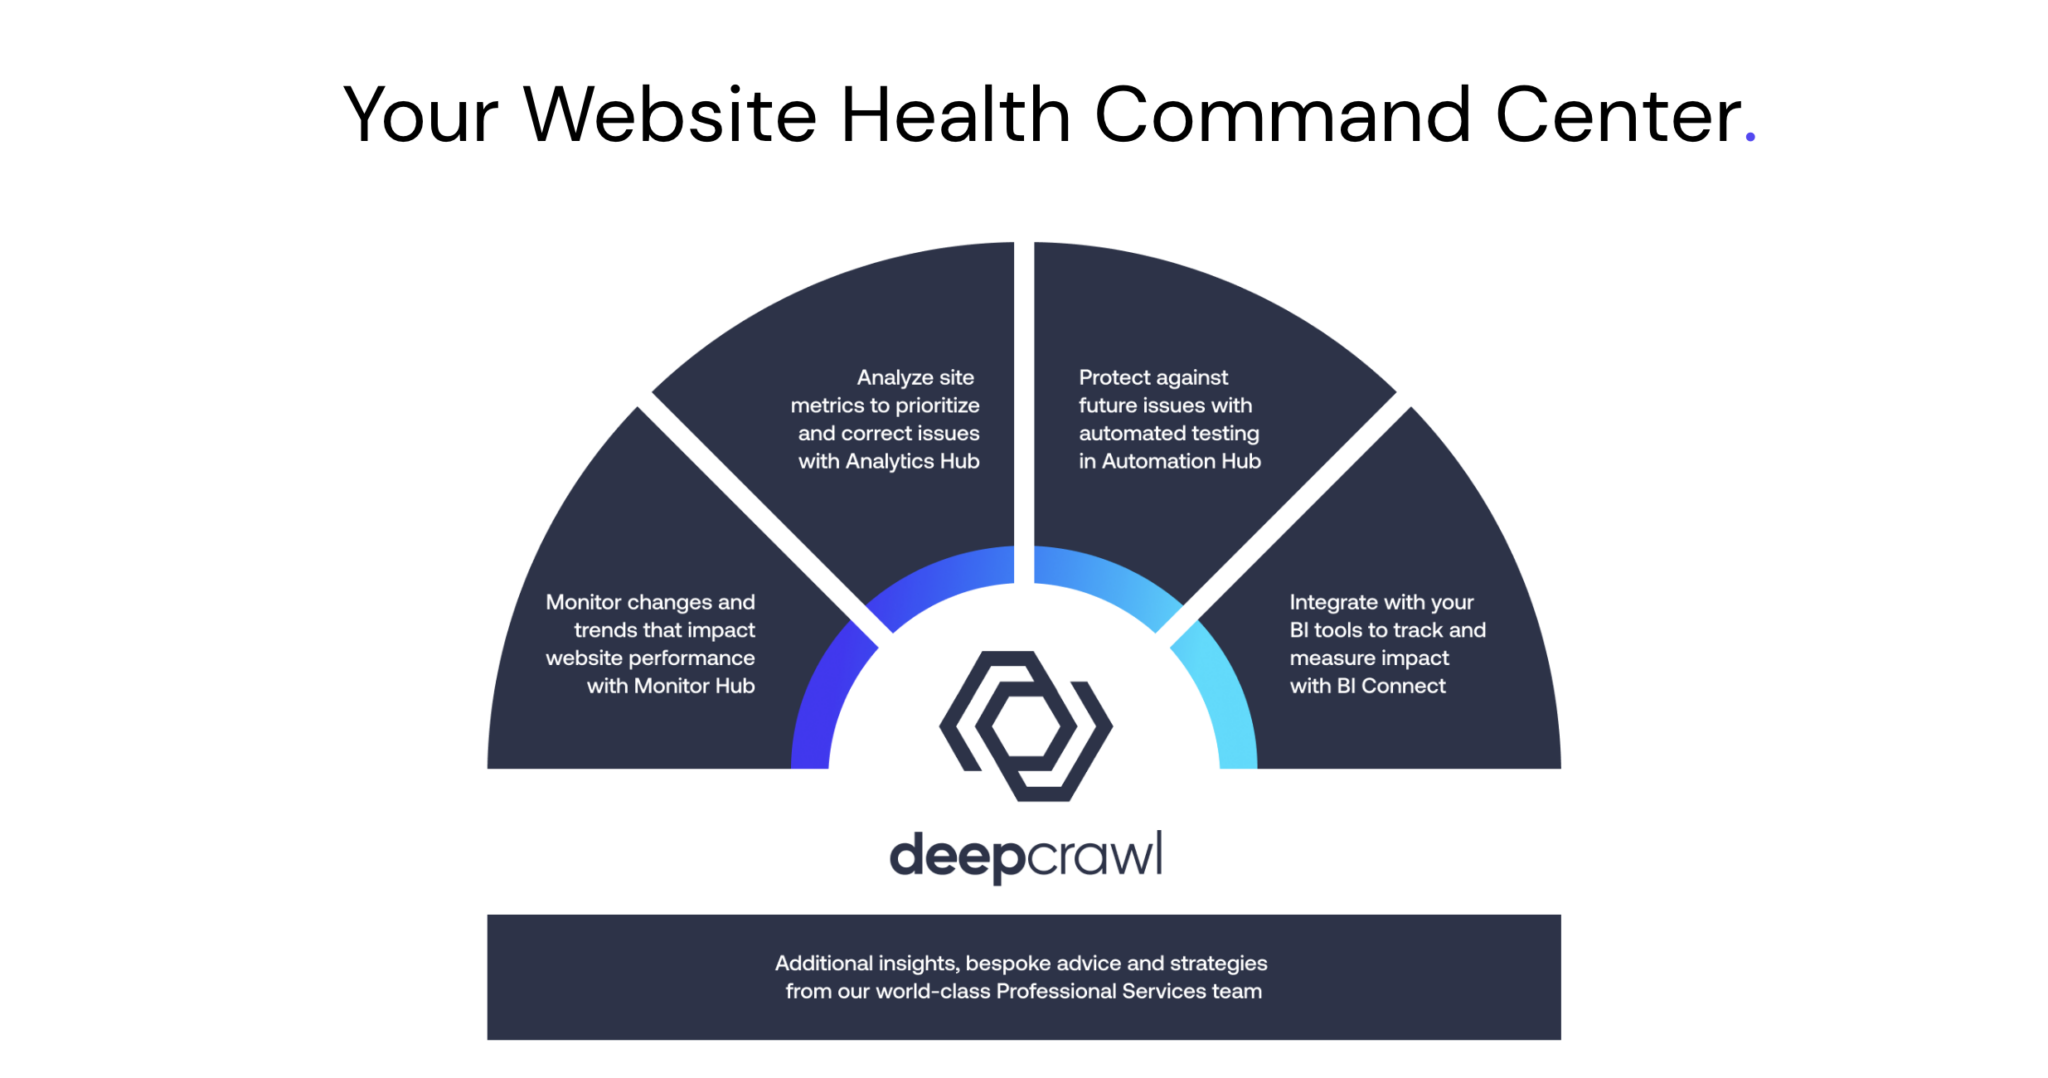 Deepcrawl's platform is your website health command center for technical SEO and website intelligence